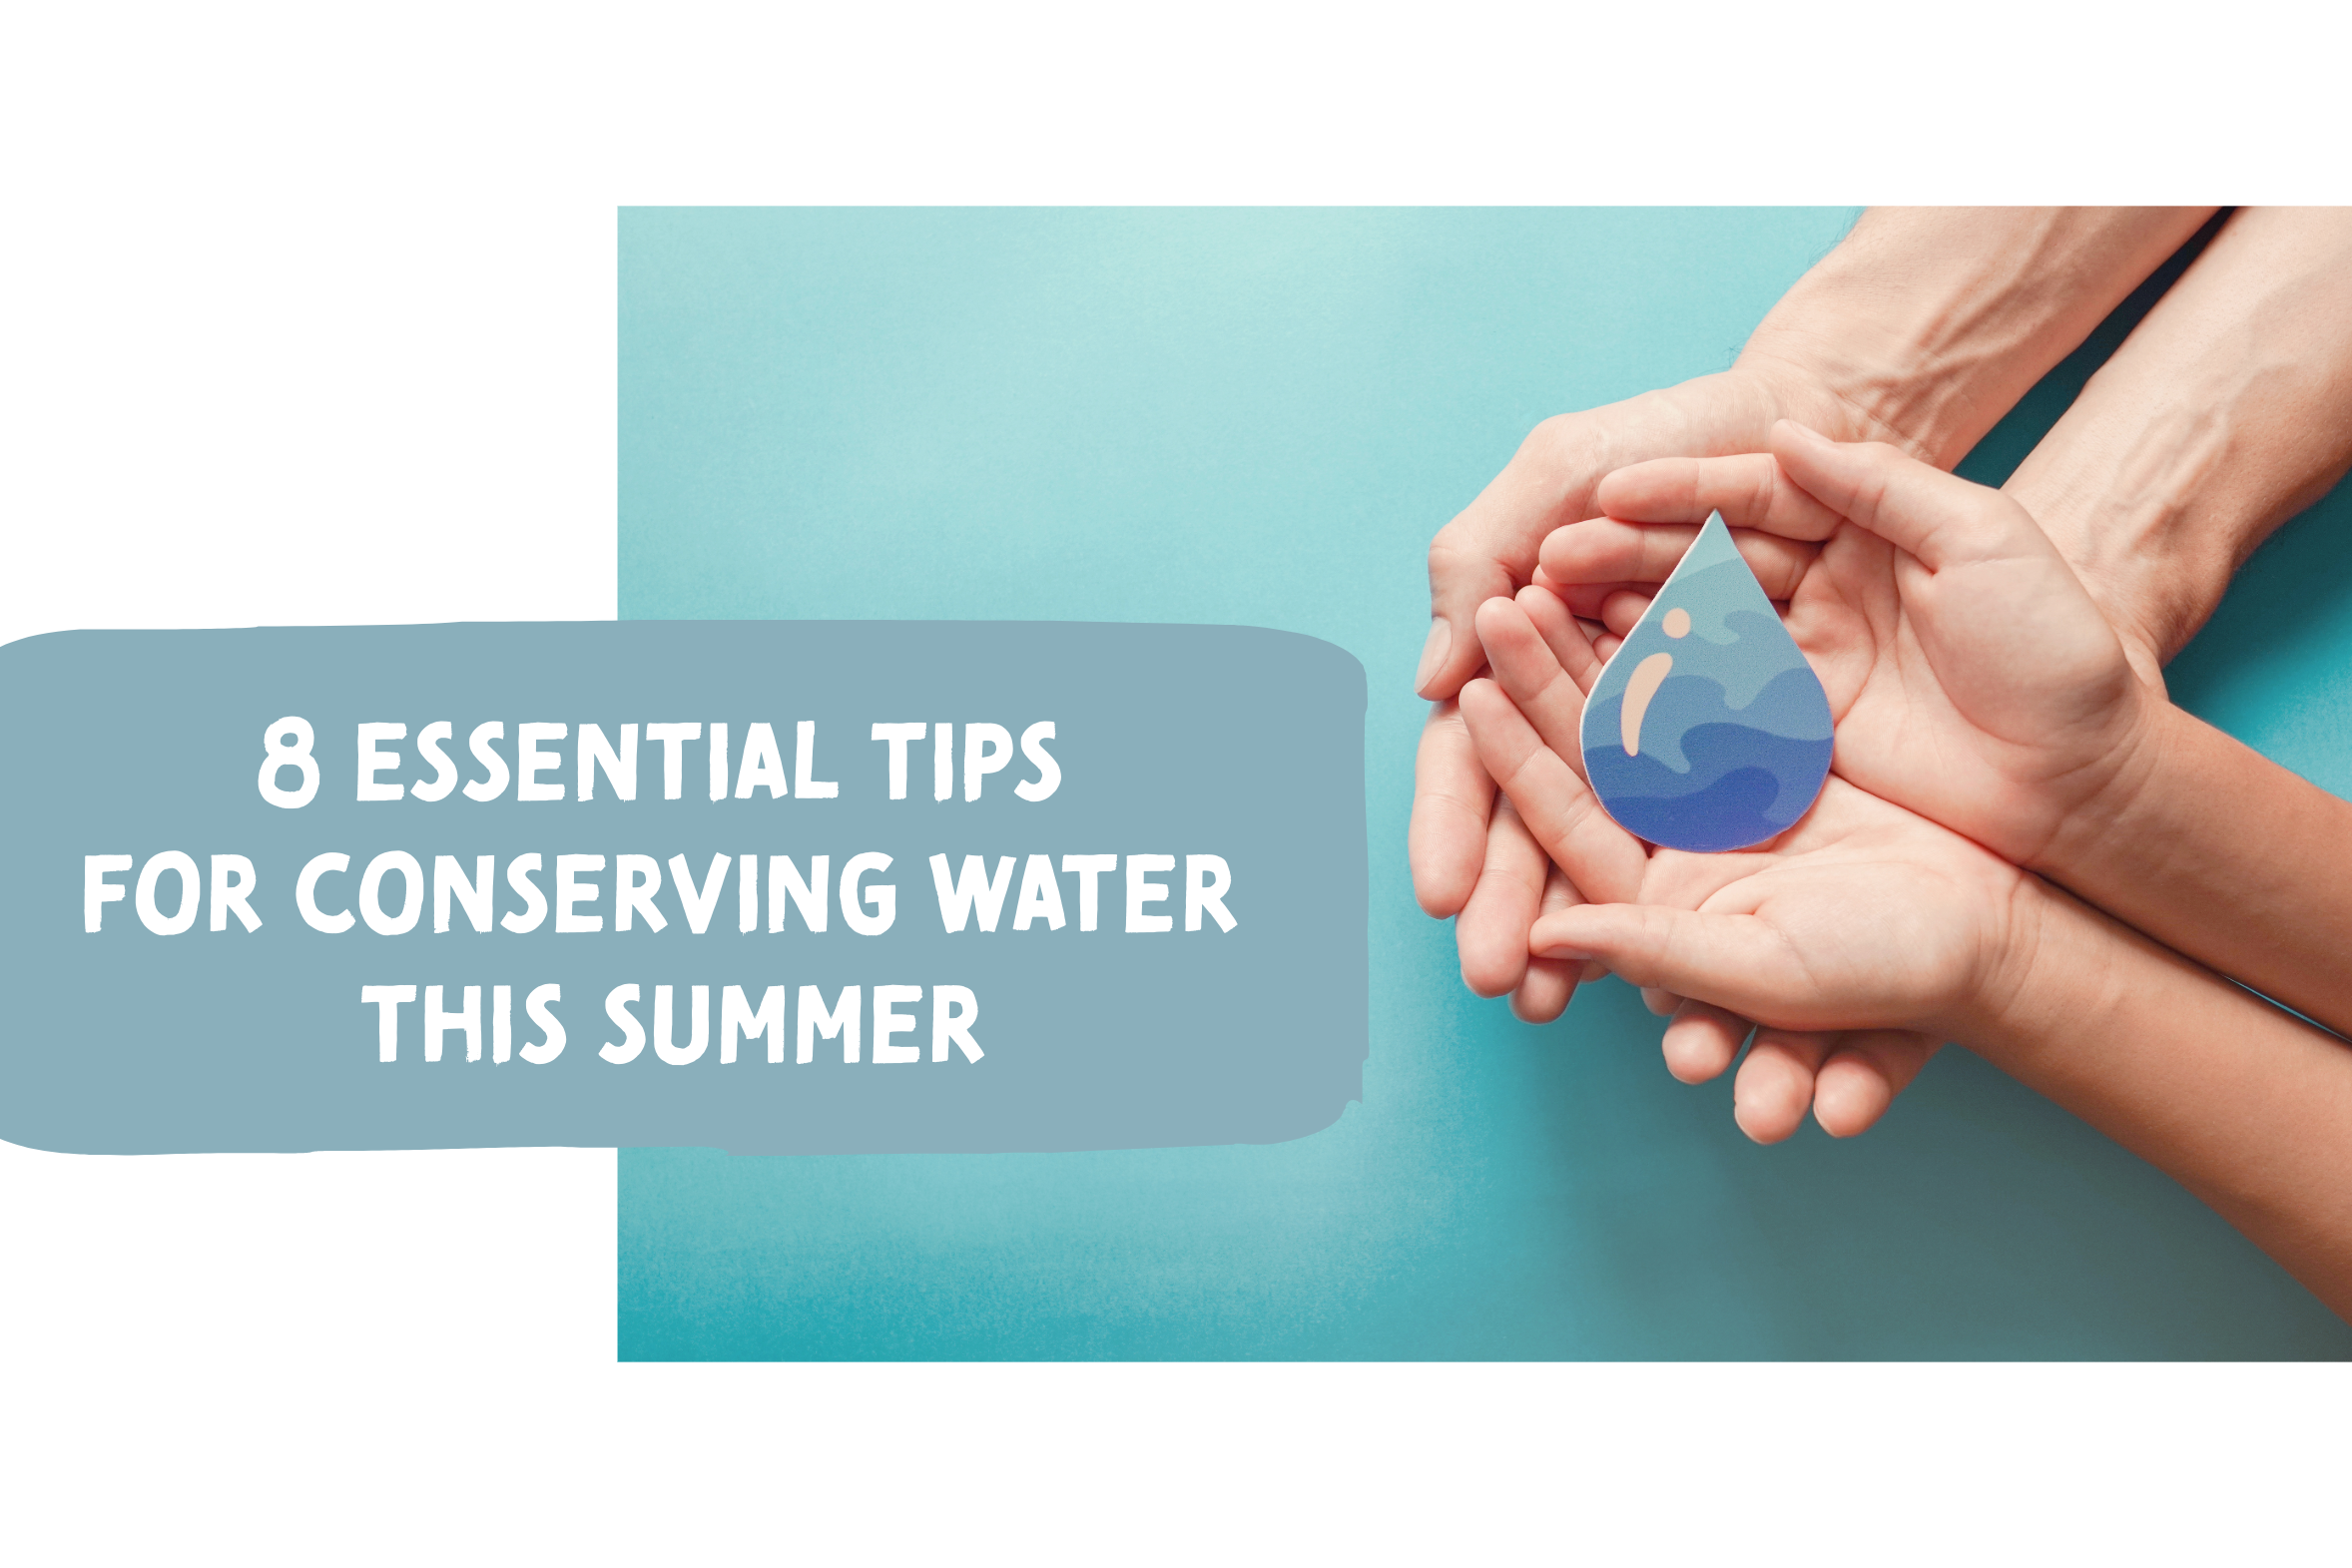 Blog on how to conserve water in the summer.